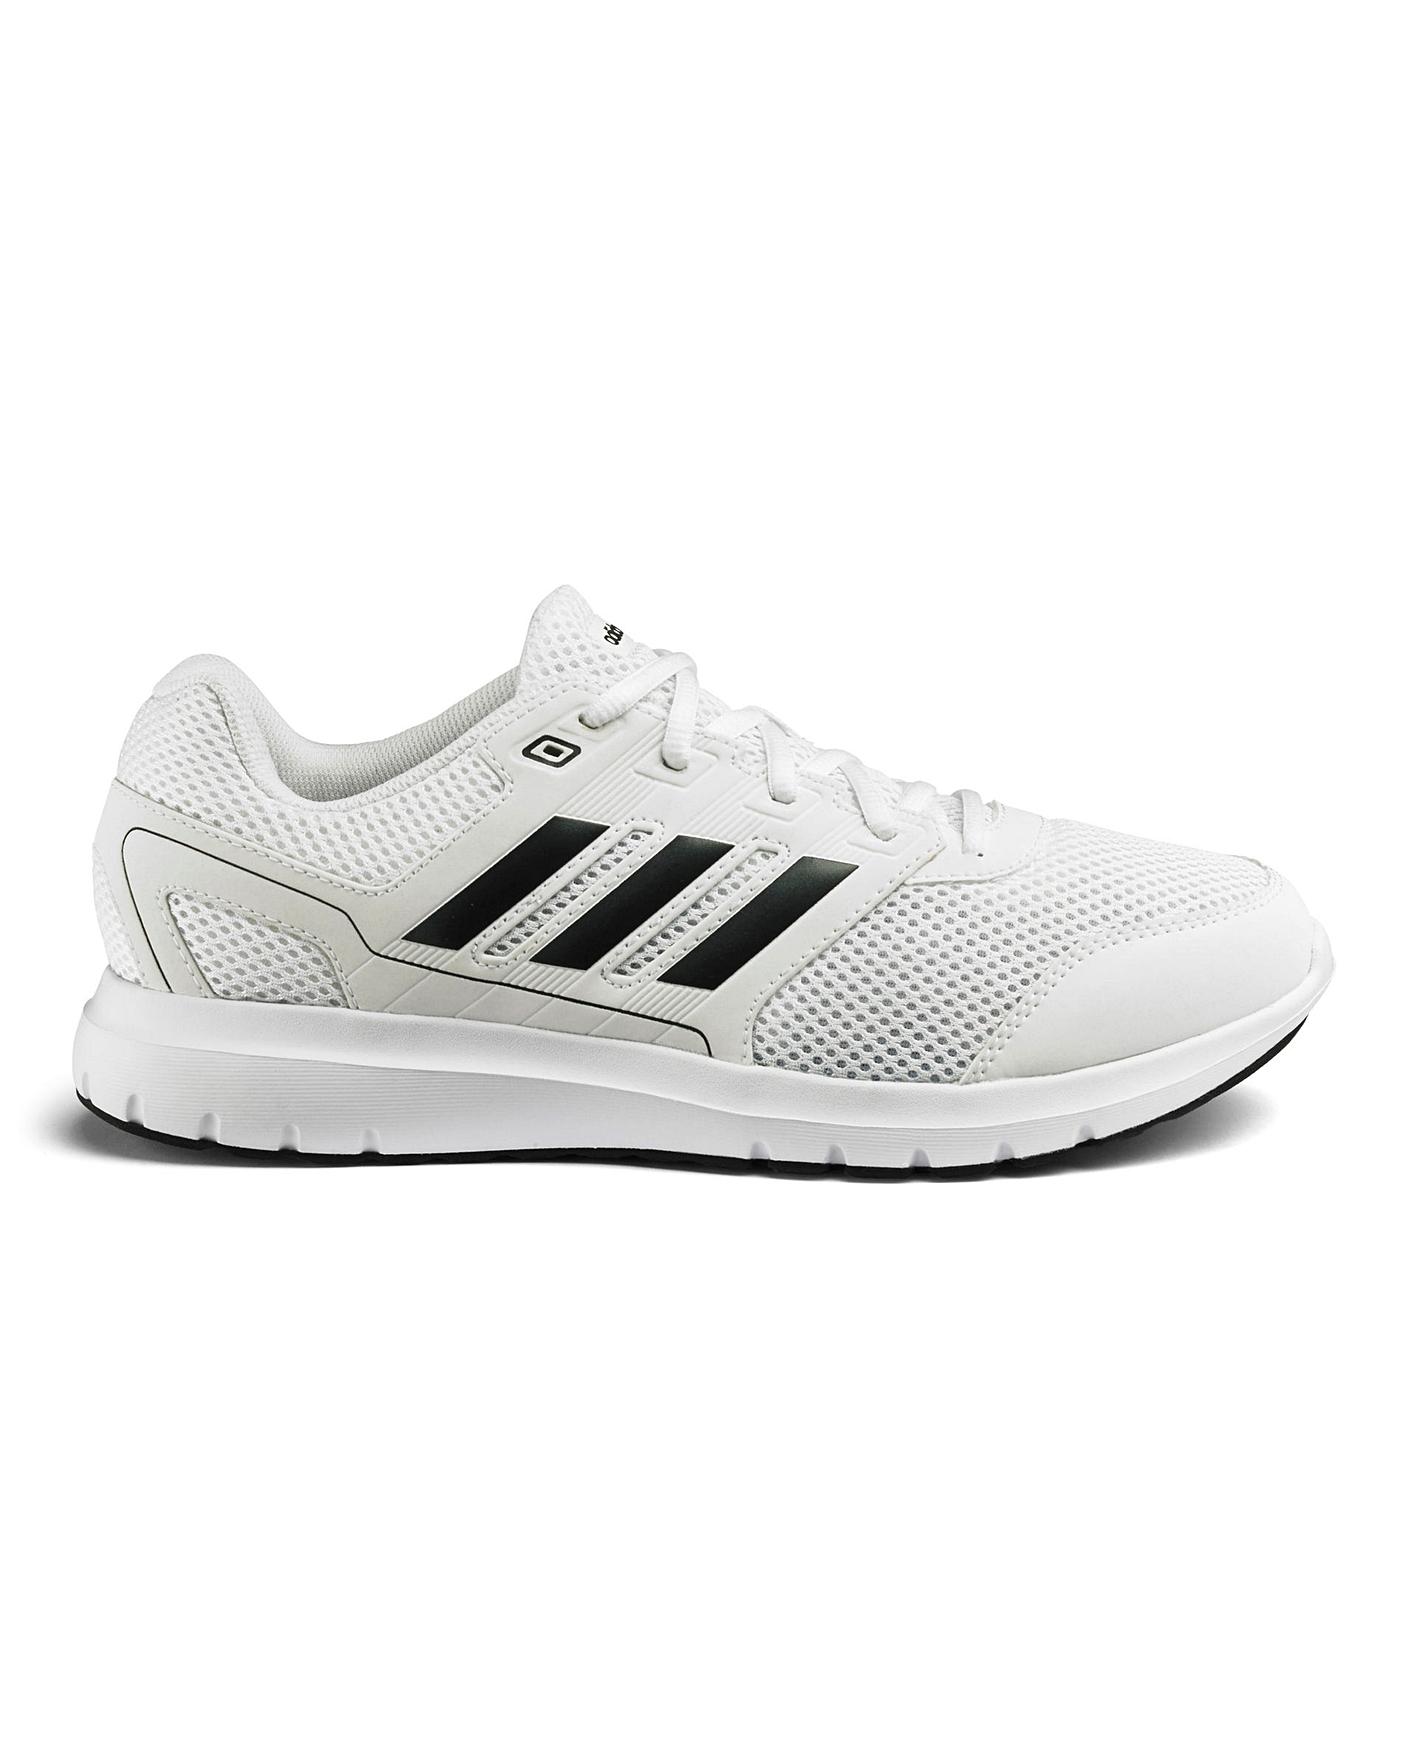 adidas Duramo Lite 2.0 Trainers | Oxendales